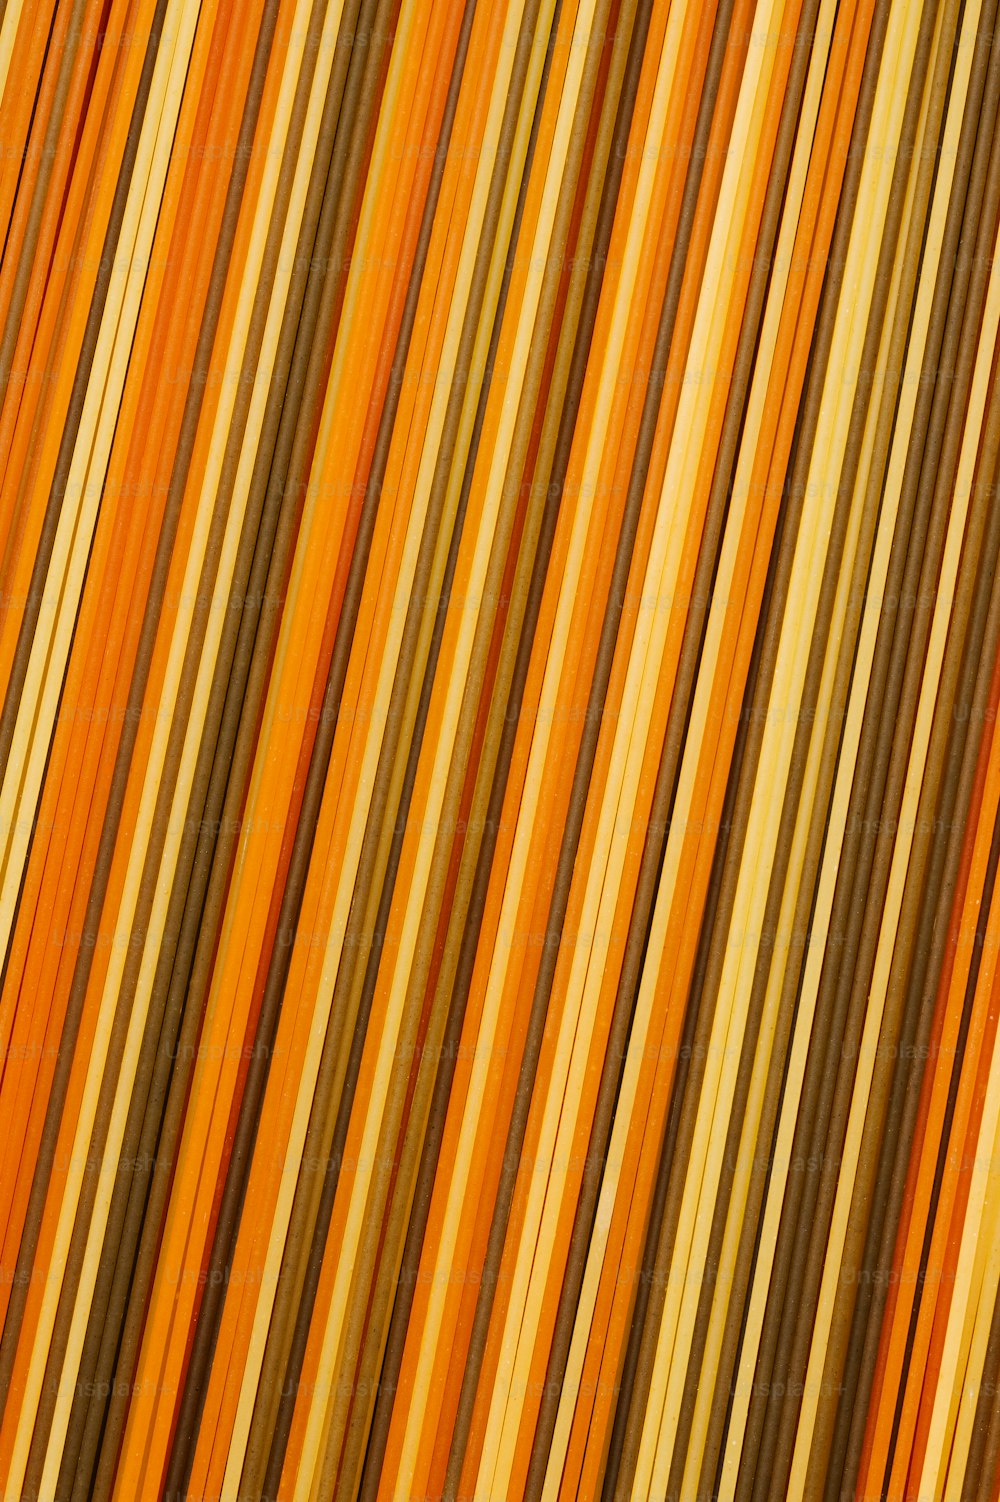 7,864,804 Stripe Pattern Images, Stock Photos, 3D objects